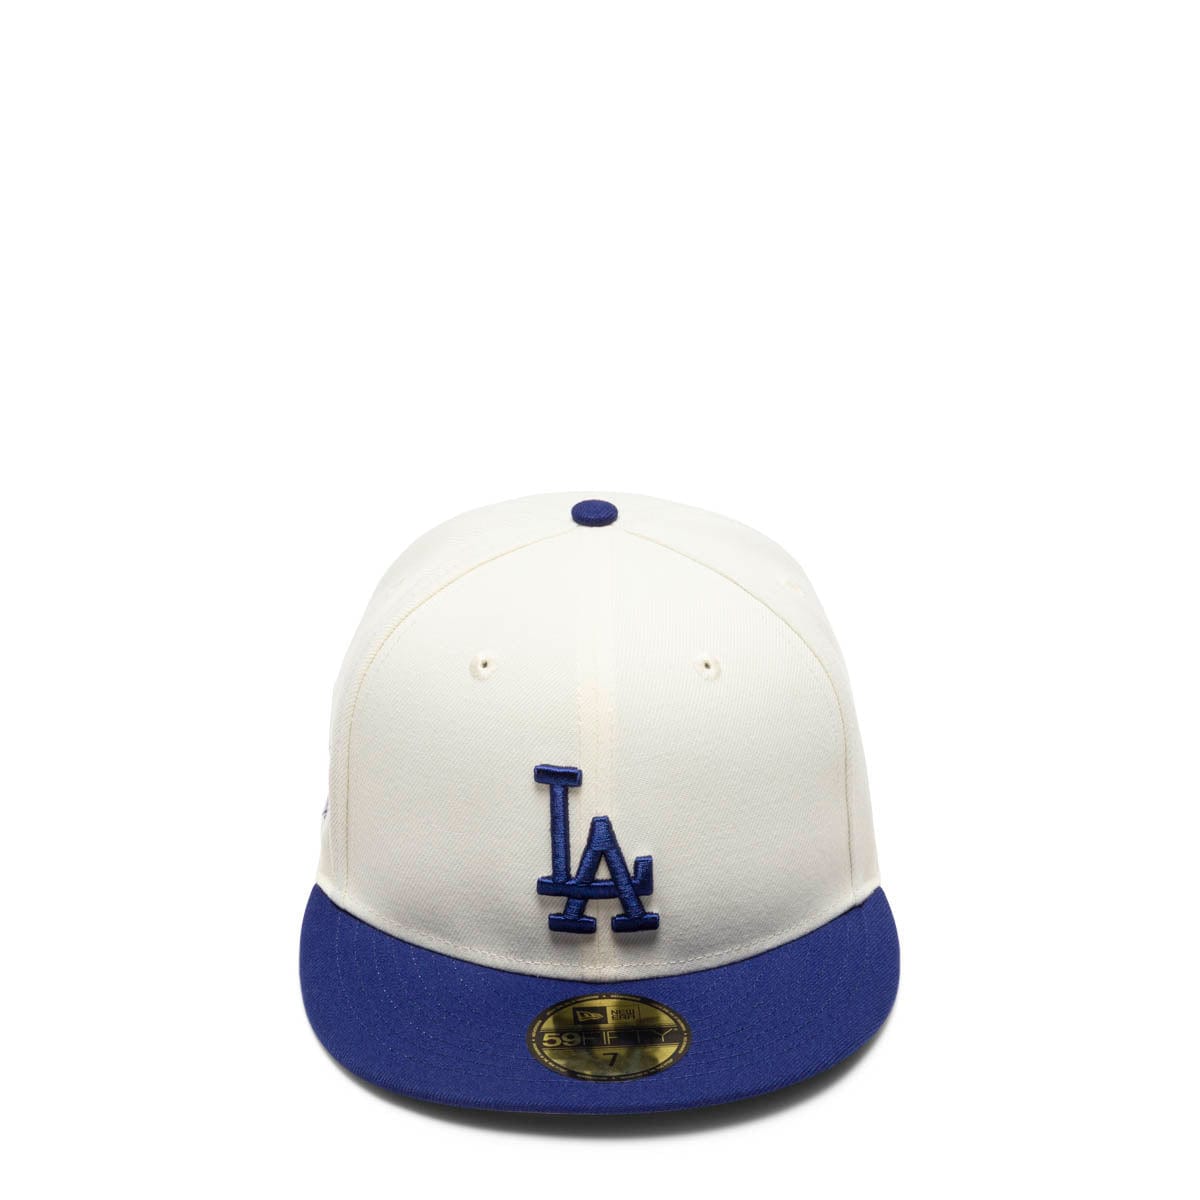 Los Angeles Dodgers Fitted New Era 59Fifty White Logo Basic Cap Hat Navy 7 5/8